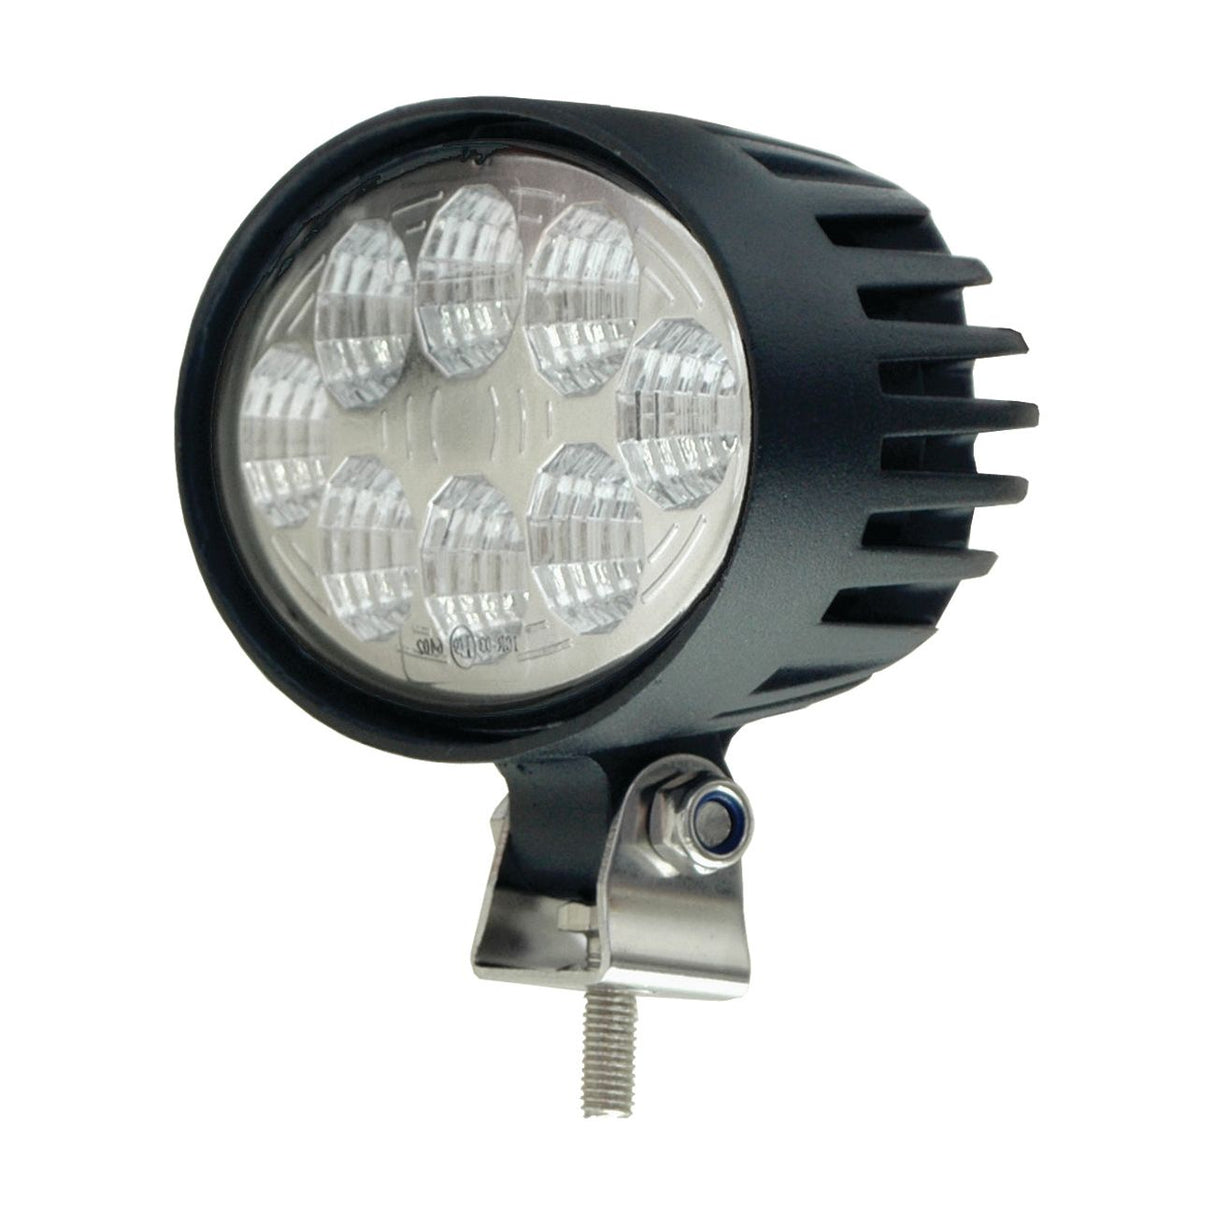 LED Work Light, Interference: Class 3, 1600 Lumens Raw, 10-30V ()
 - S.129486 - Farming Parts